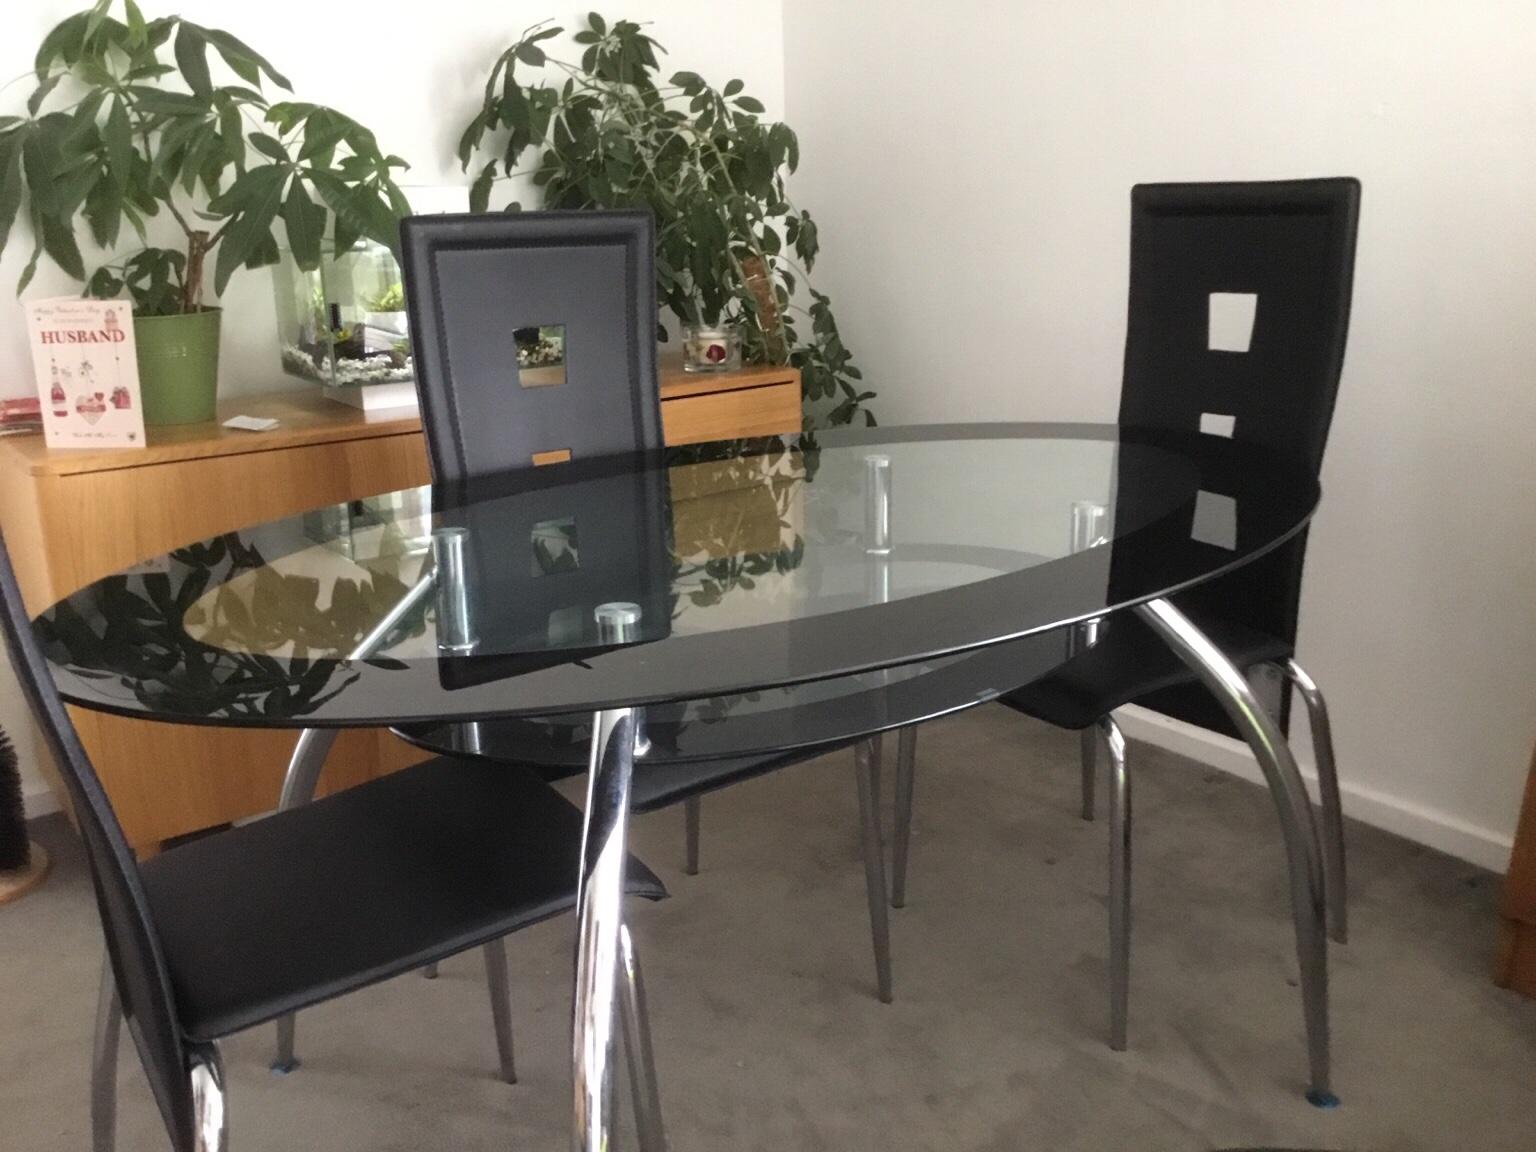 Oval Glass Dining Room Table And Chairs In Dy8 Dudley Fur 40 00 Zum Verkauf Shpock De